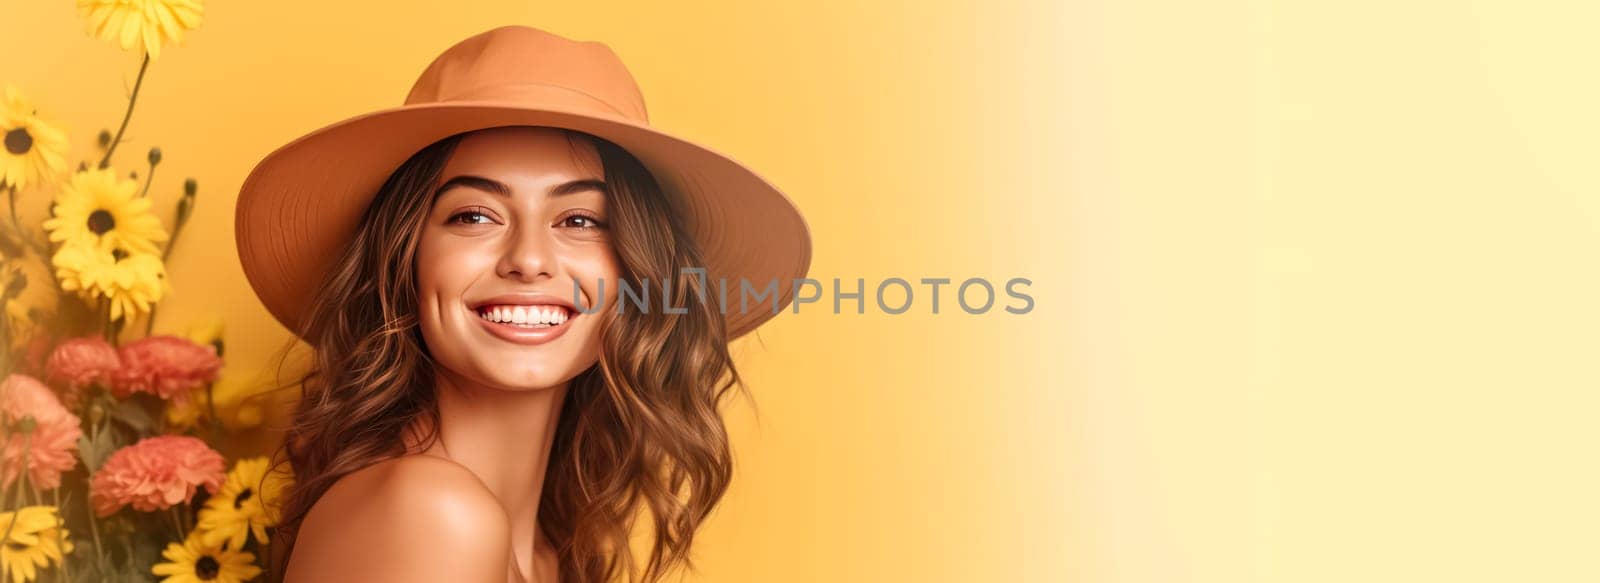 A woman with long hair is smiling and holding a yellow flower. Concept of happiness and joy, as the woman is enjoying her time and the beautiful flower